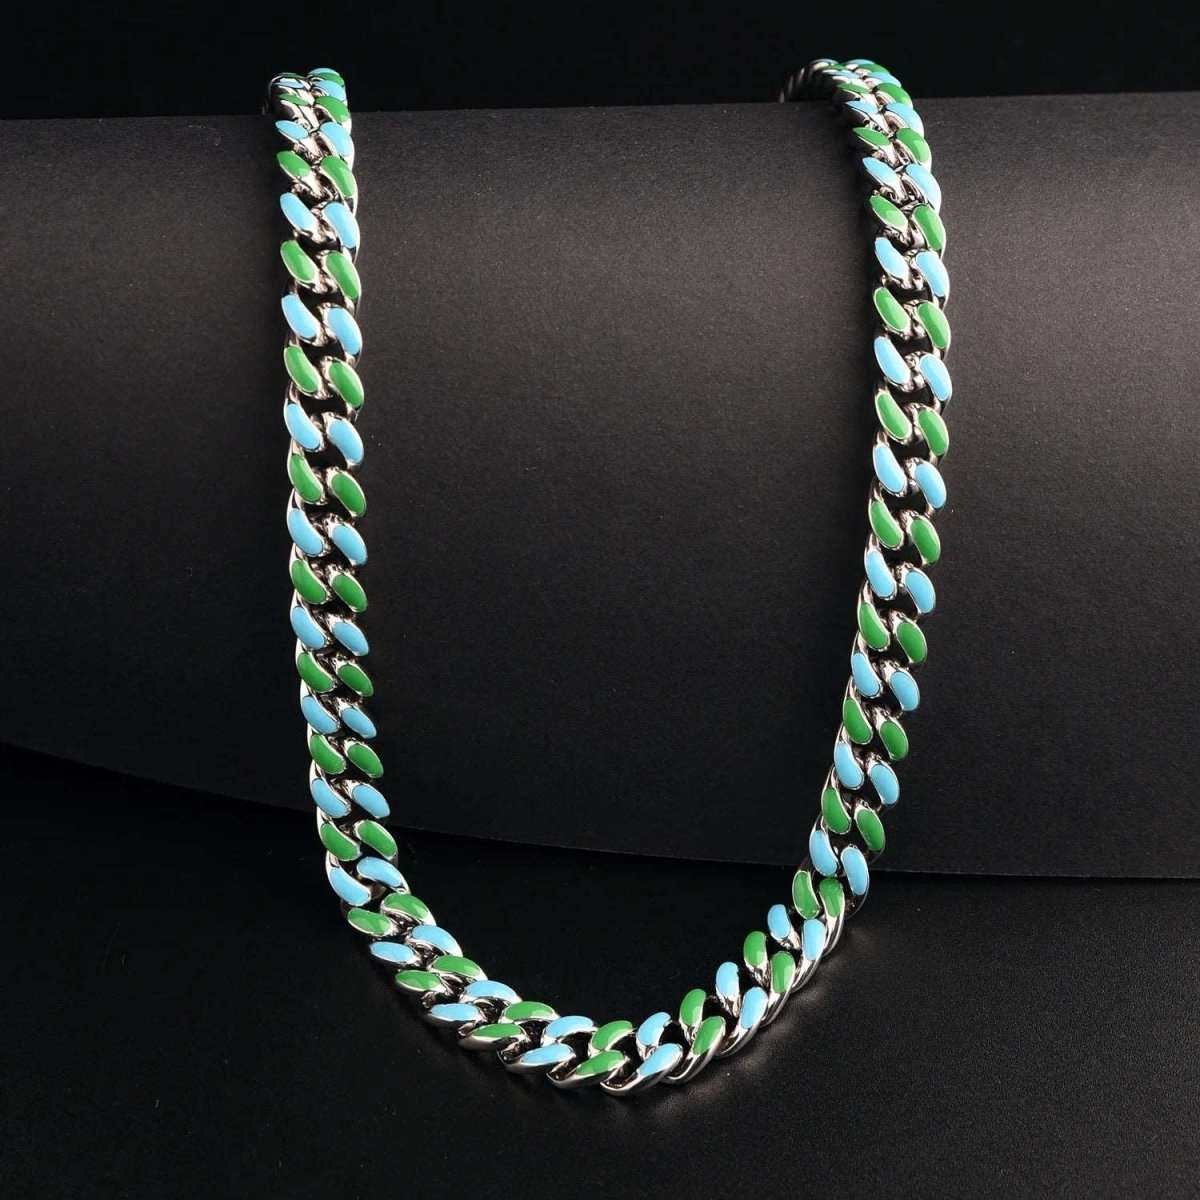 10mm Oil Dripped Enamel Cuban Link Chain and Bracelet - Uniquely You Online - Chain and Bracelet